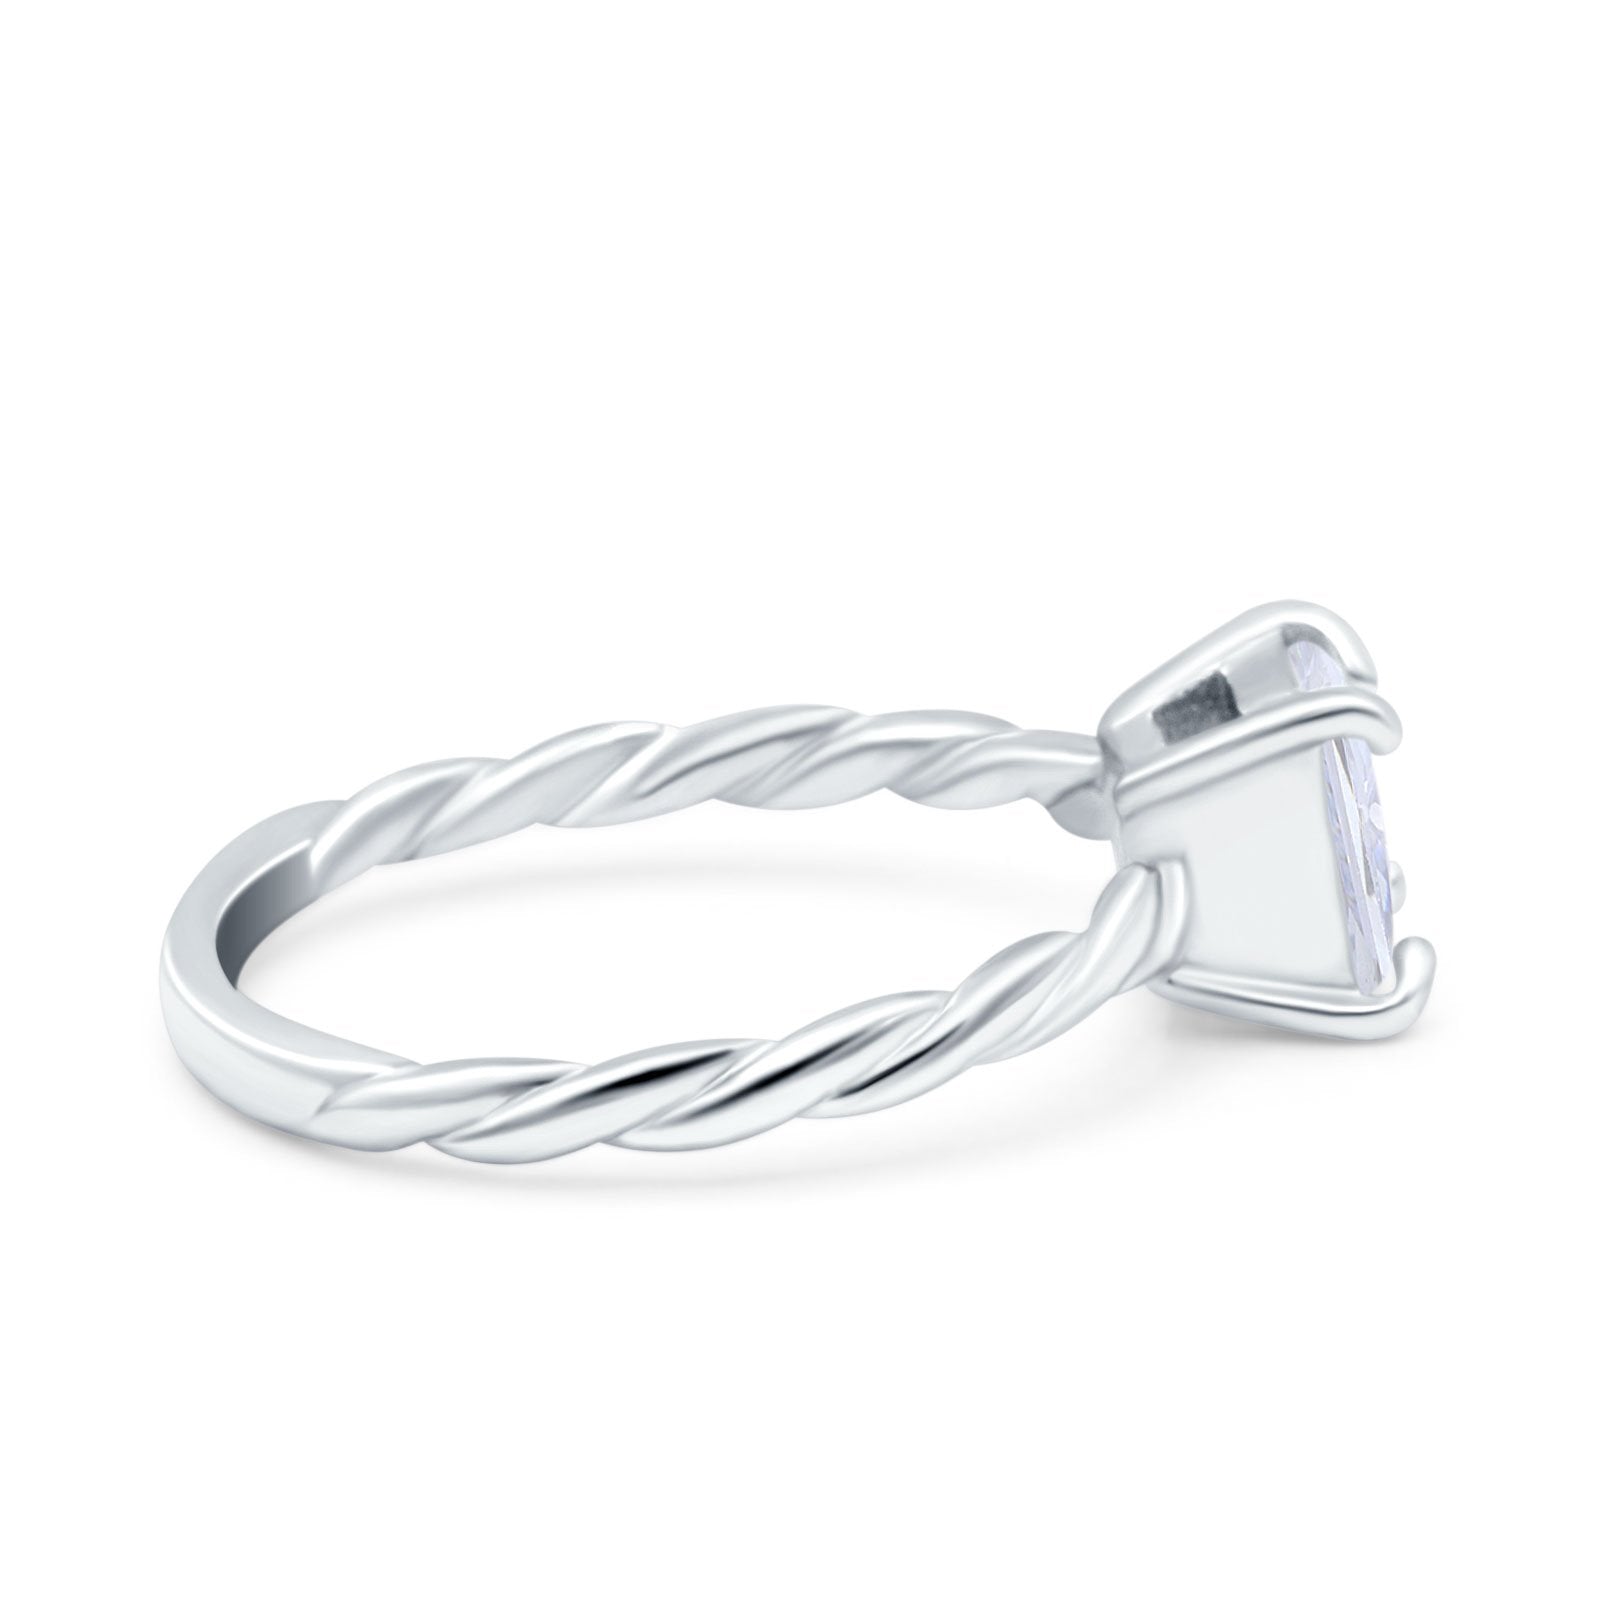 Solitaire Accent Twisted Fashion Ring Princess Cut Simulated Cubic Zirconia 925 Sterling Silver